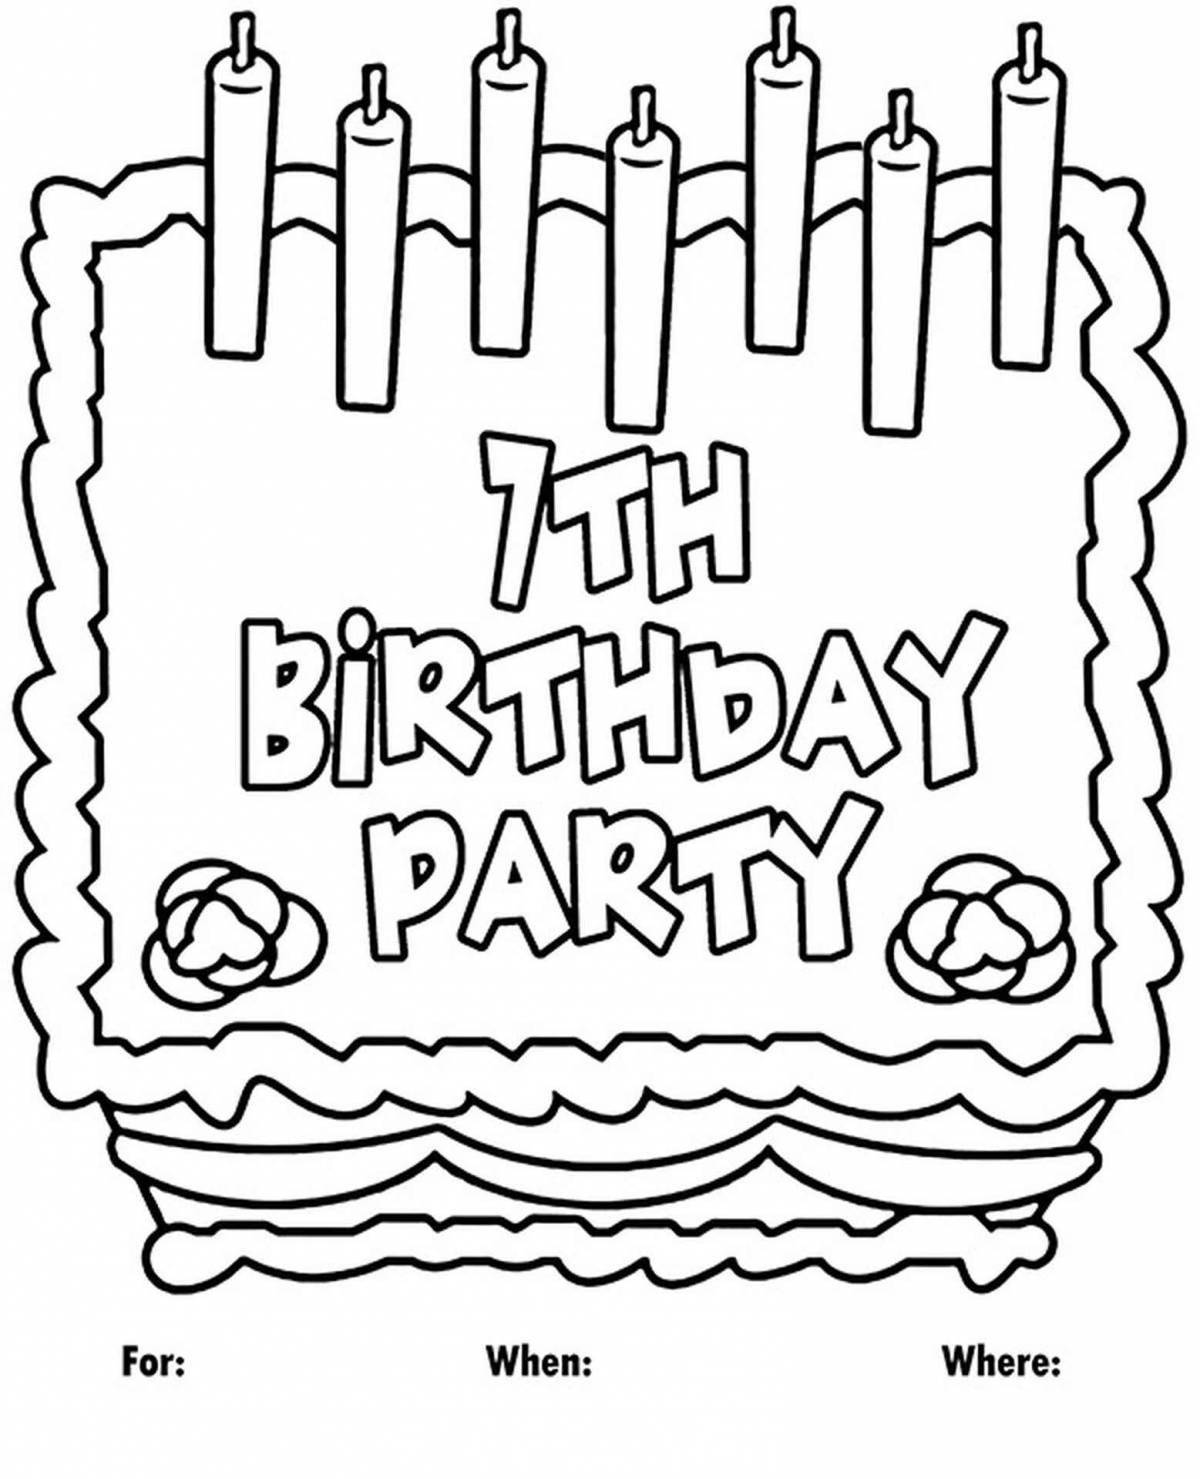 Coloring page birthday invitation for a festive girl